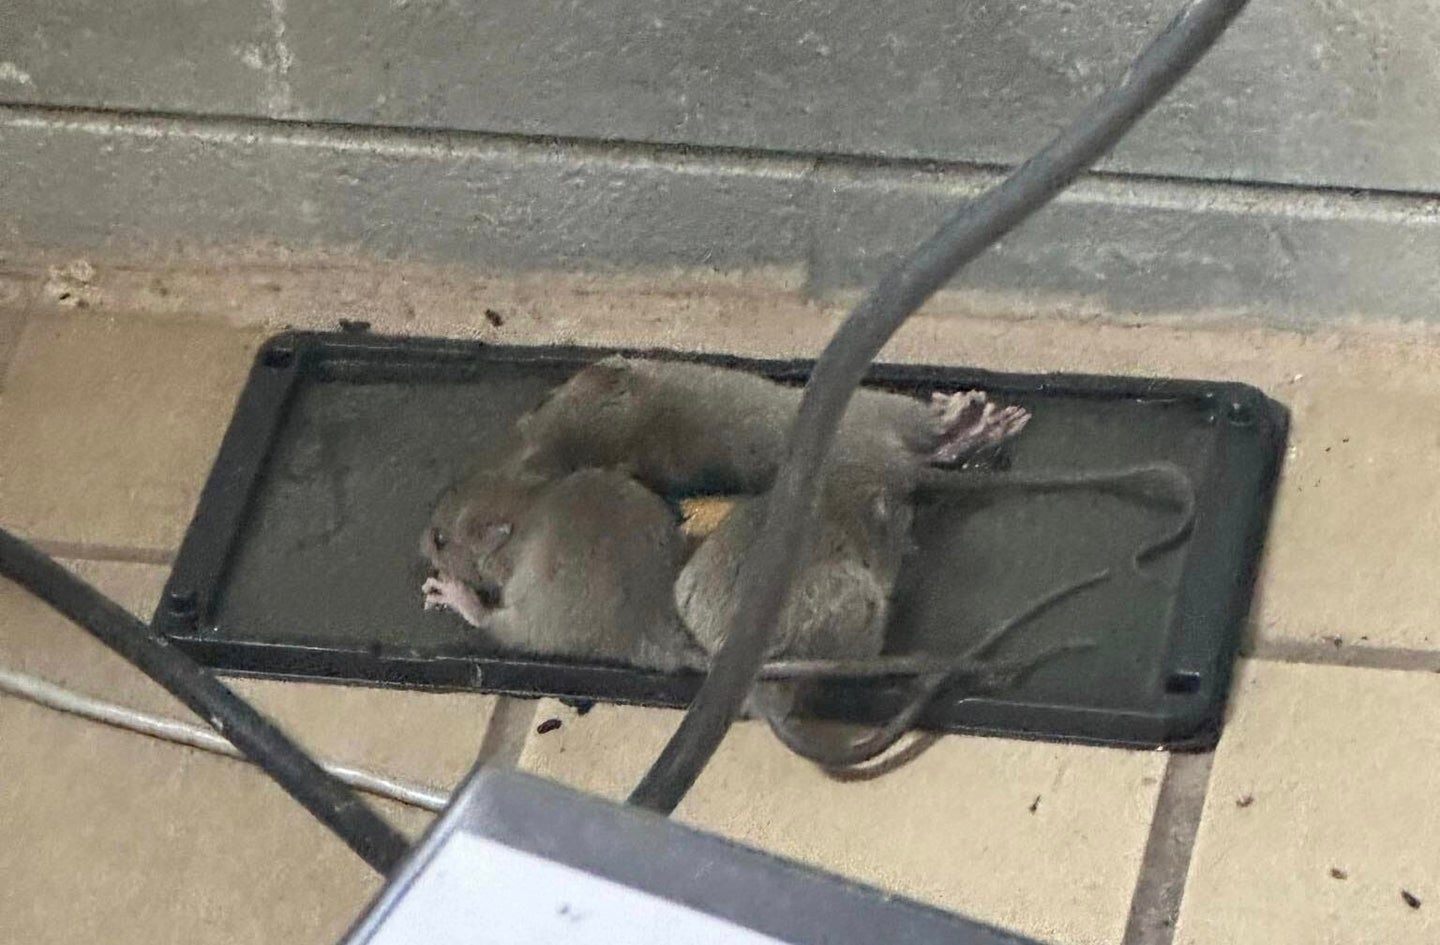 A dining facility on Barksdale Air Force Base, Louisiana, was closed indefinitely as photos circulated online of what appeared to be a swarm of rats in the facility. Photo from social media.